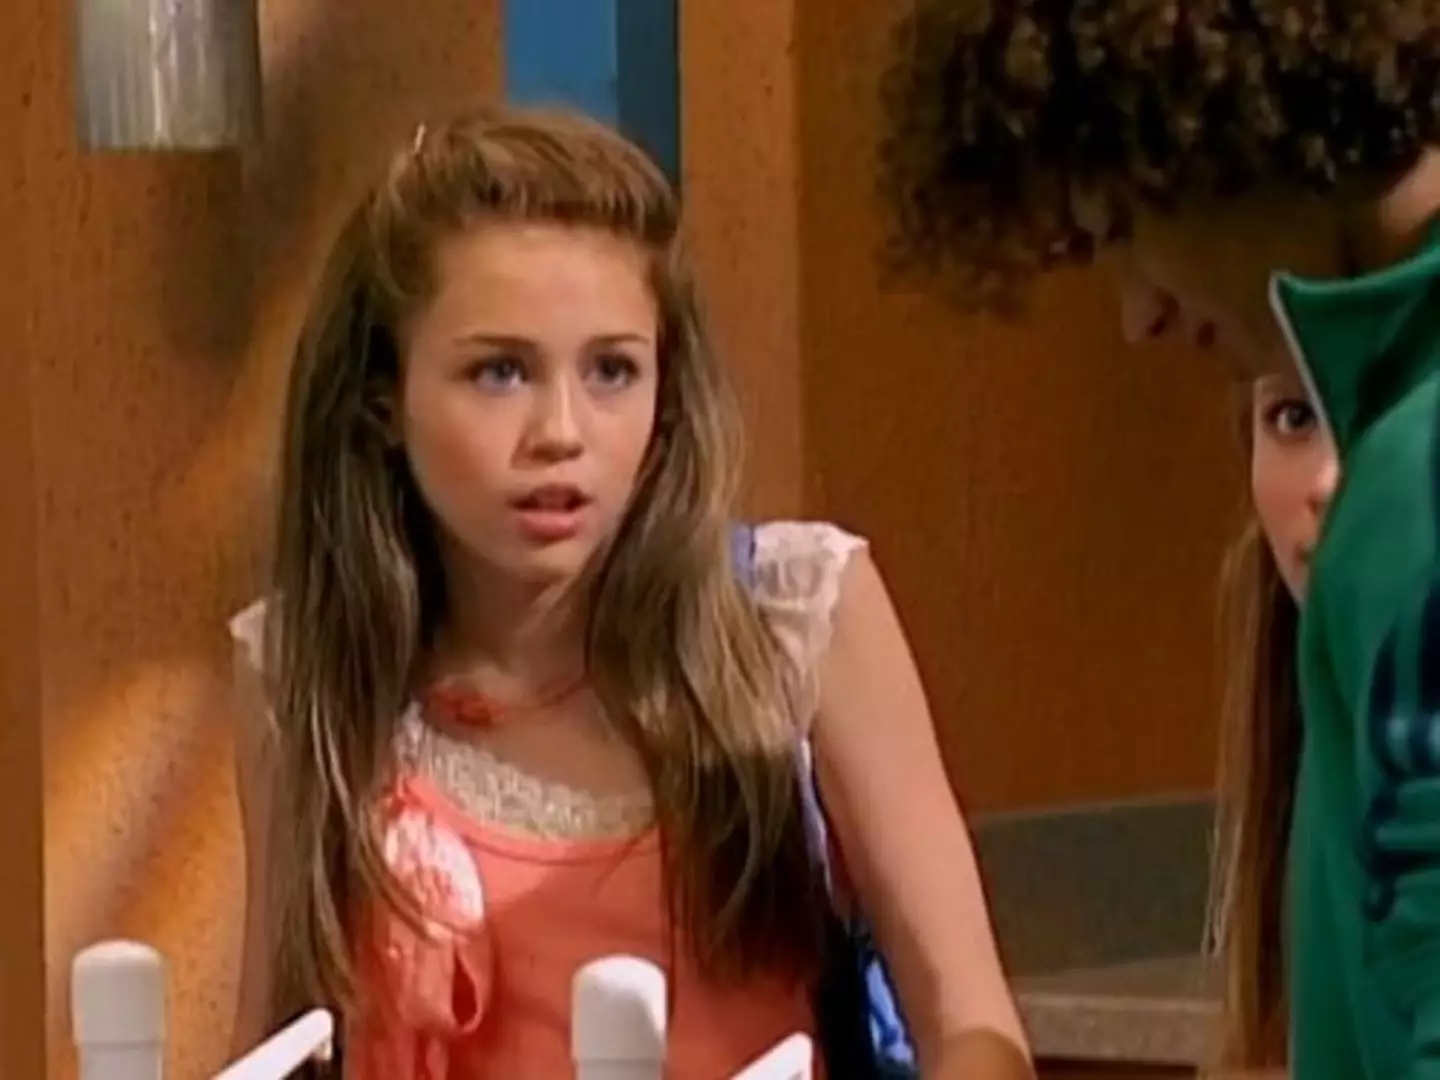 Miley Cyrus rose to fame while starring in Hannah Montana.